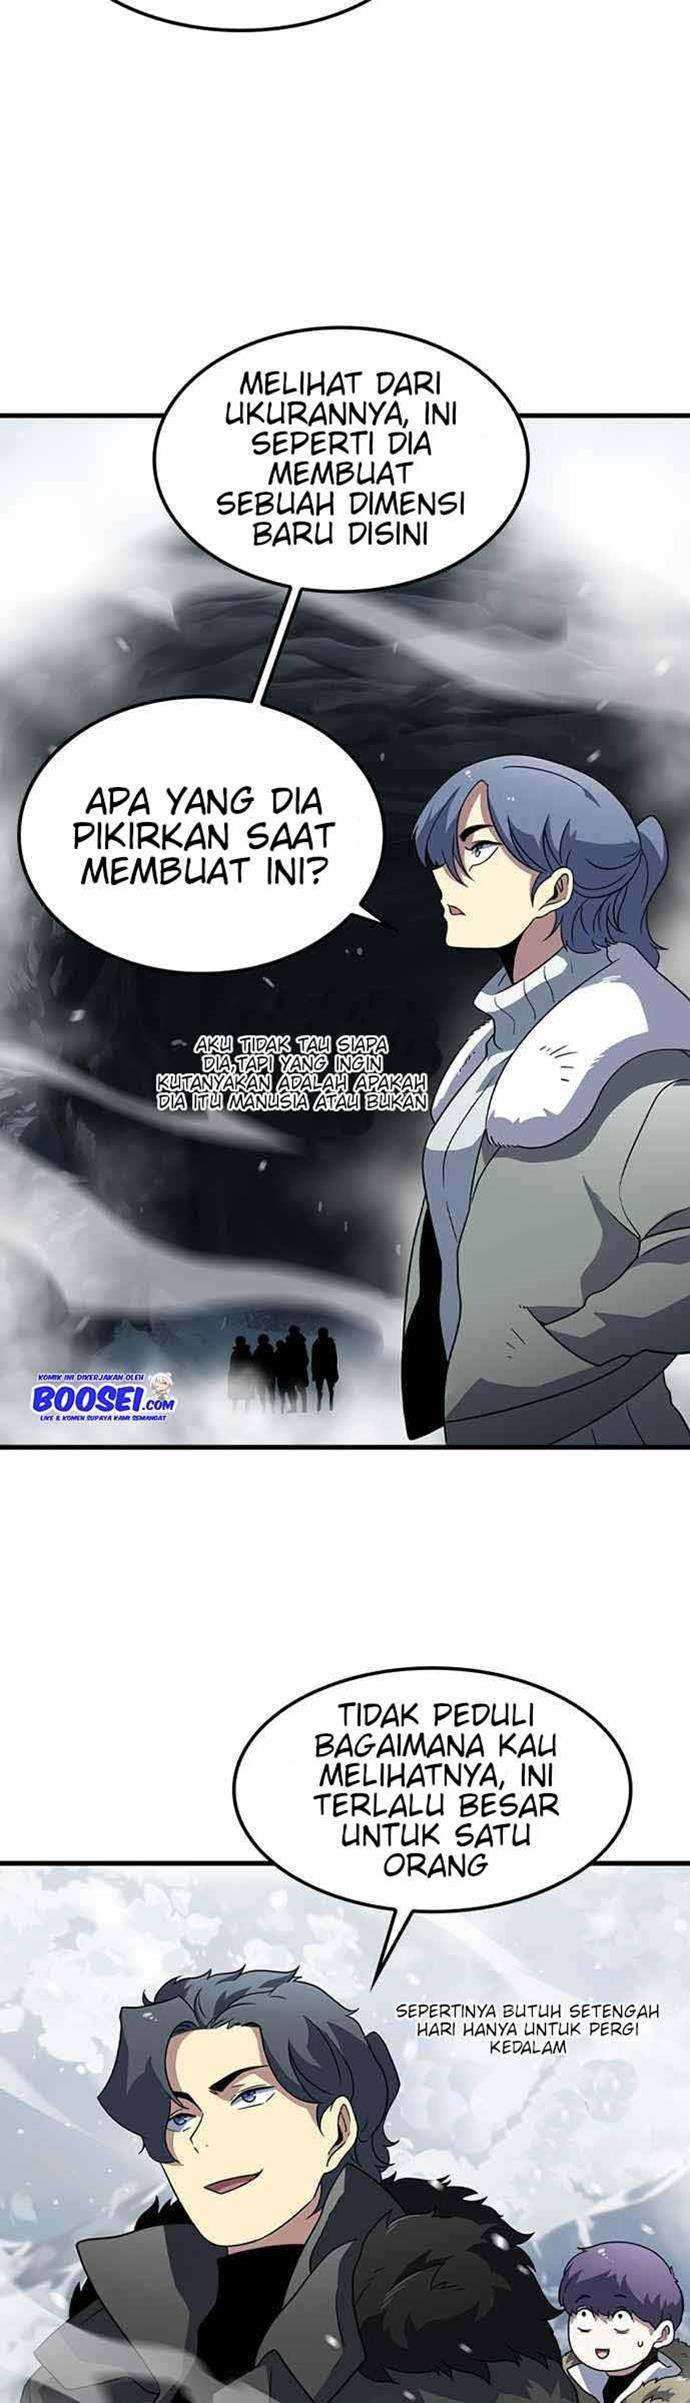 Hitpoint Chapter 17